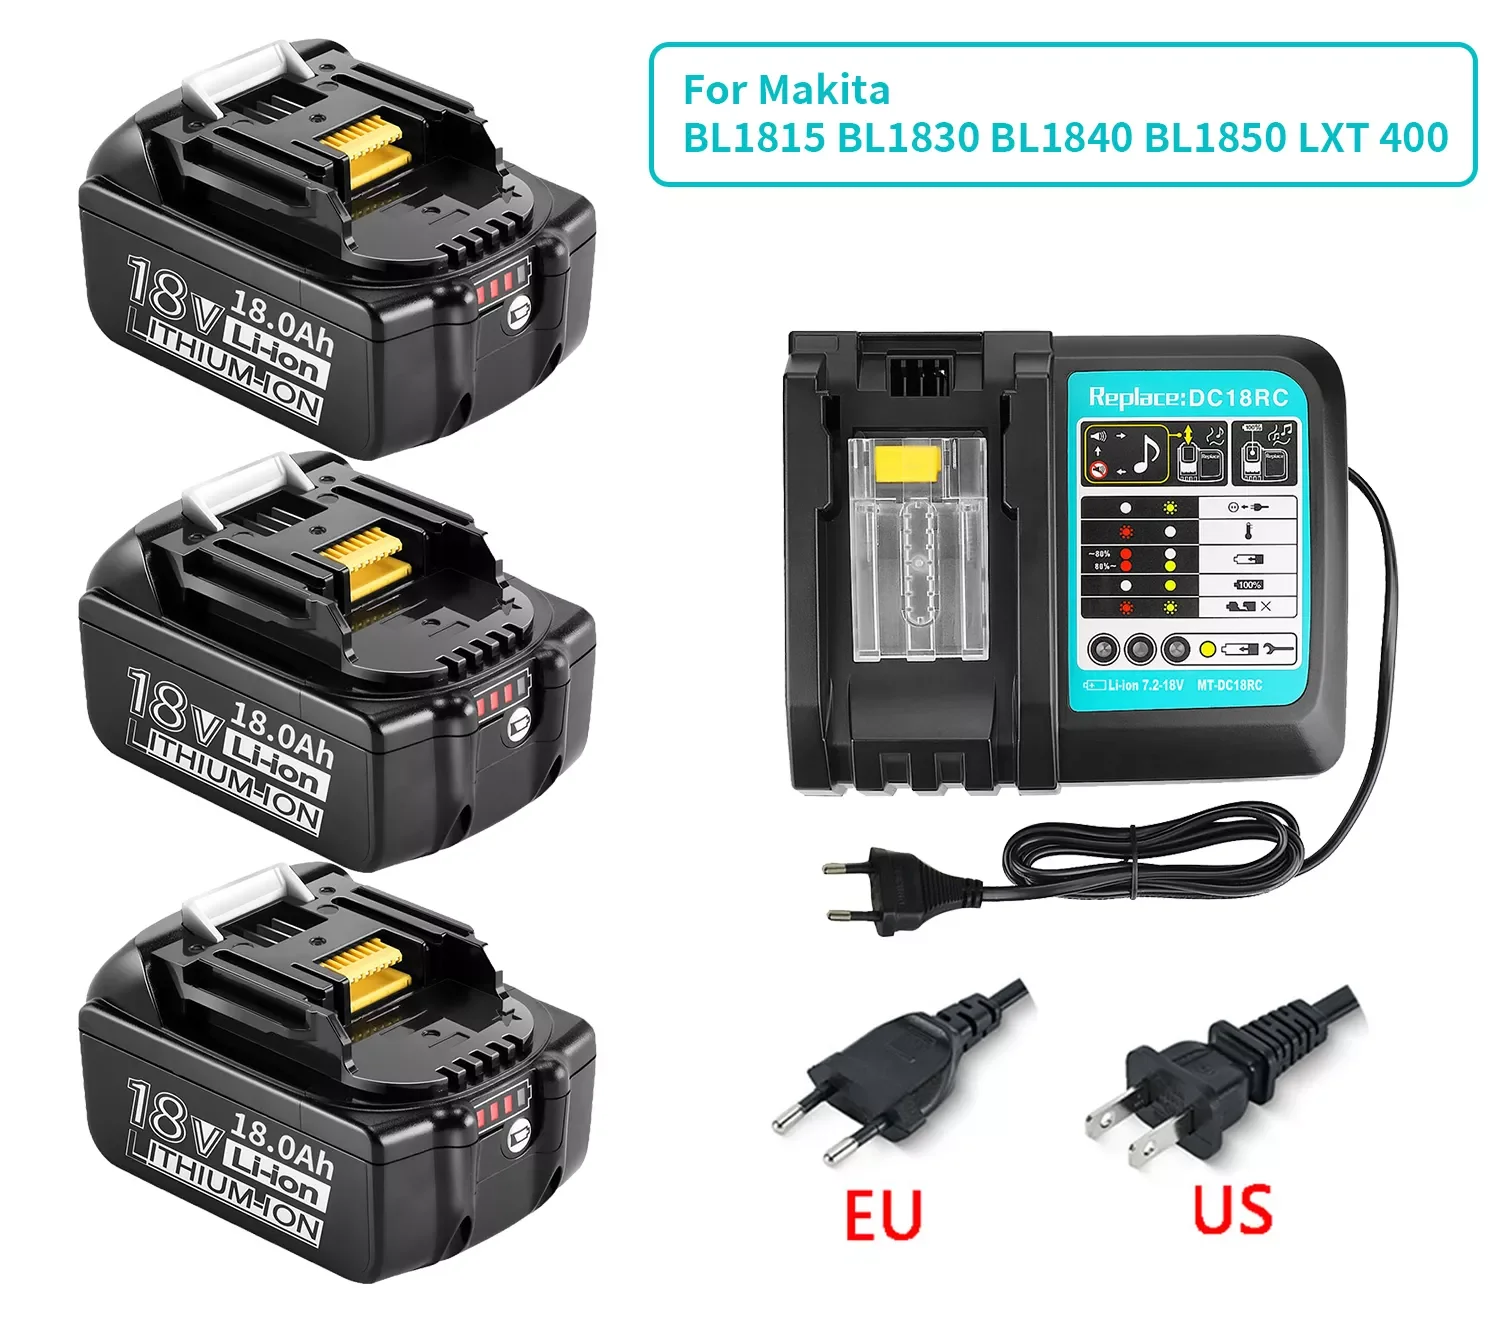 

BL1860 Rechargeable Batteries18V 18000mAh Lithium Ion for Makita 18v Battery 18Ah BL1840 BL1850 BL1830 BL1860B LXT400+Charger